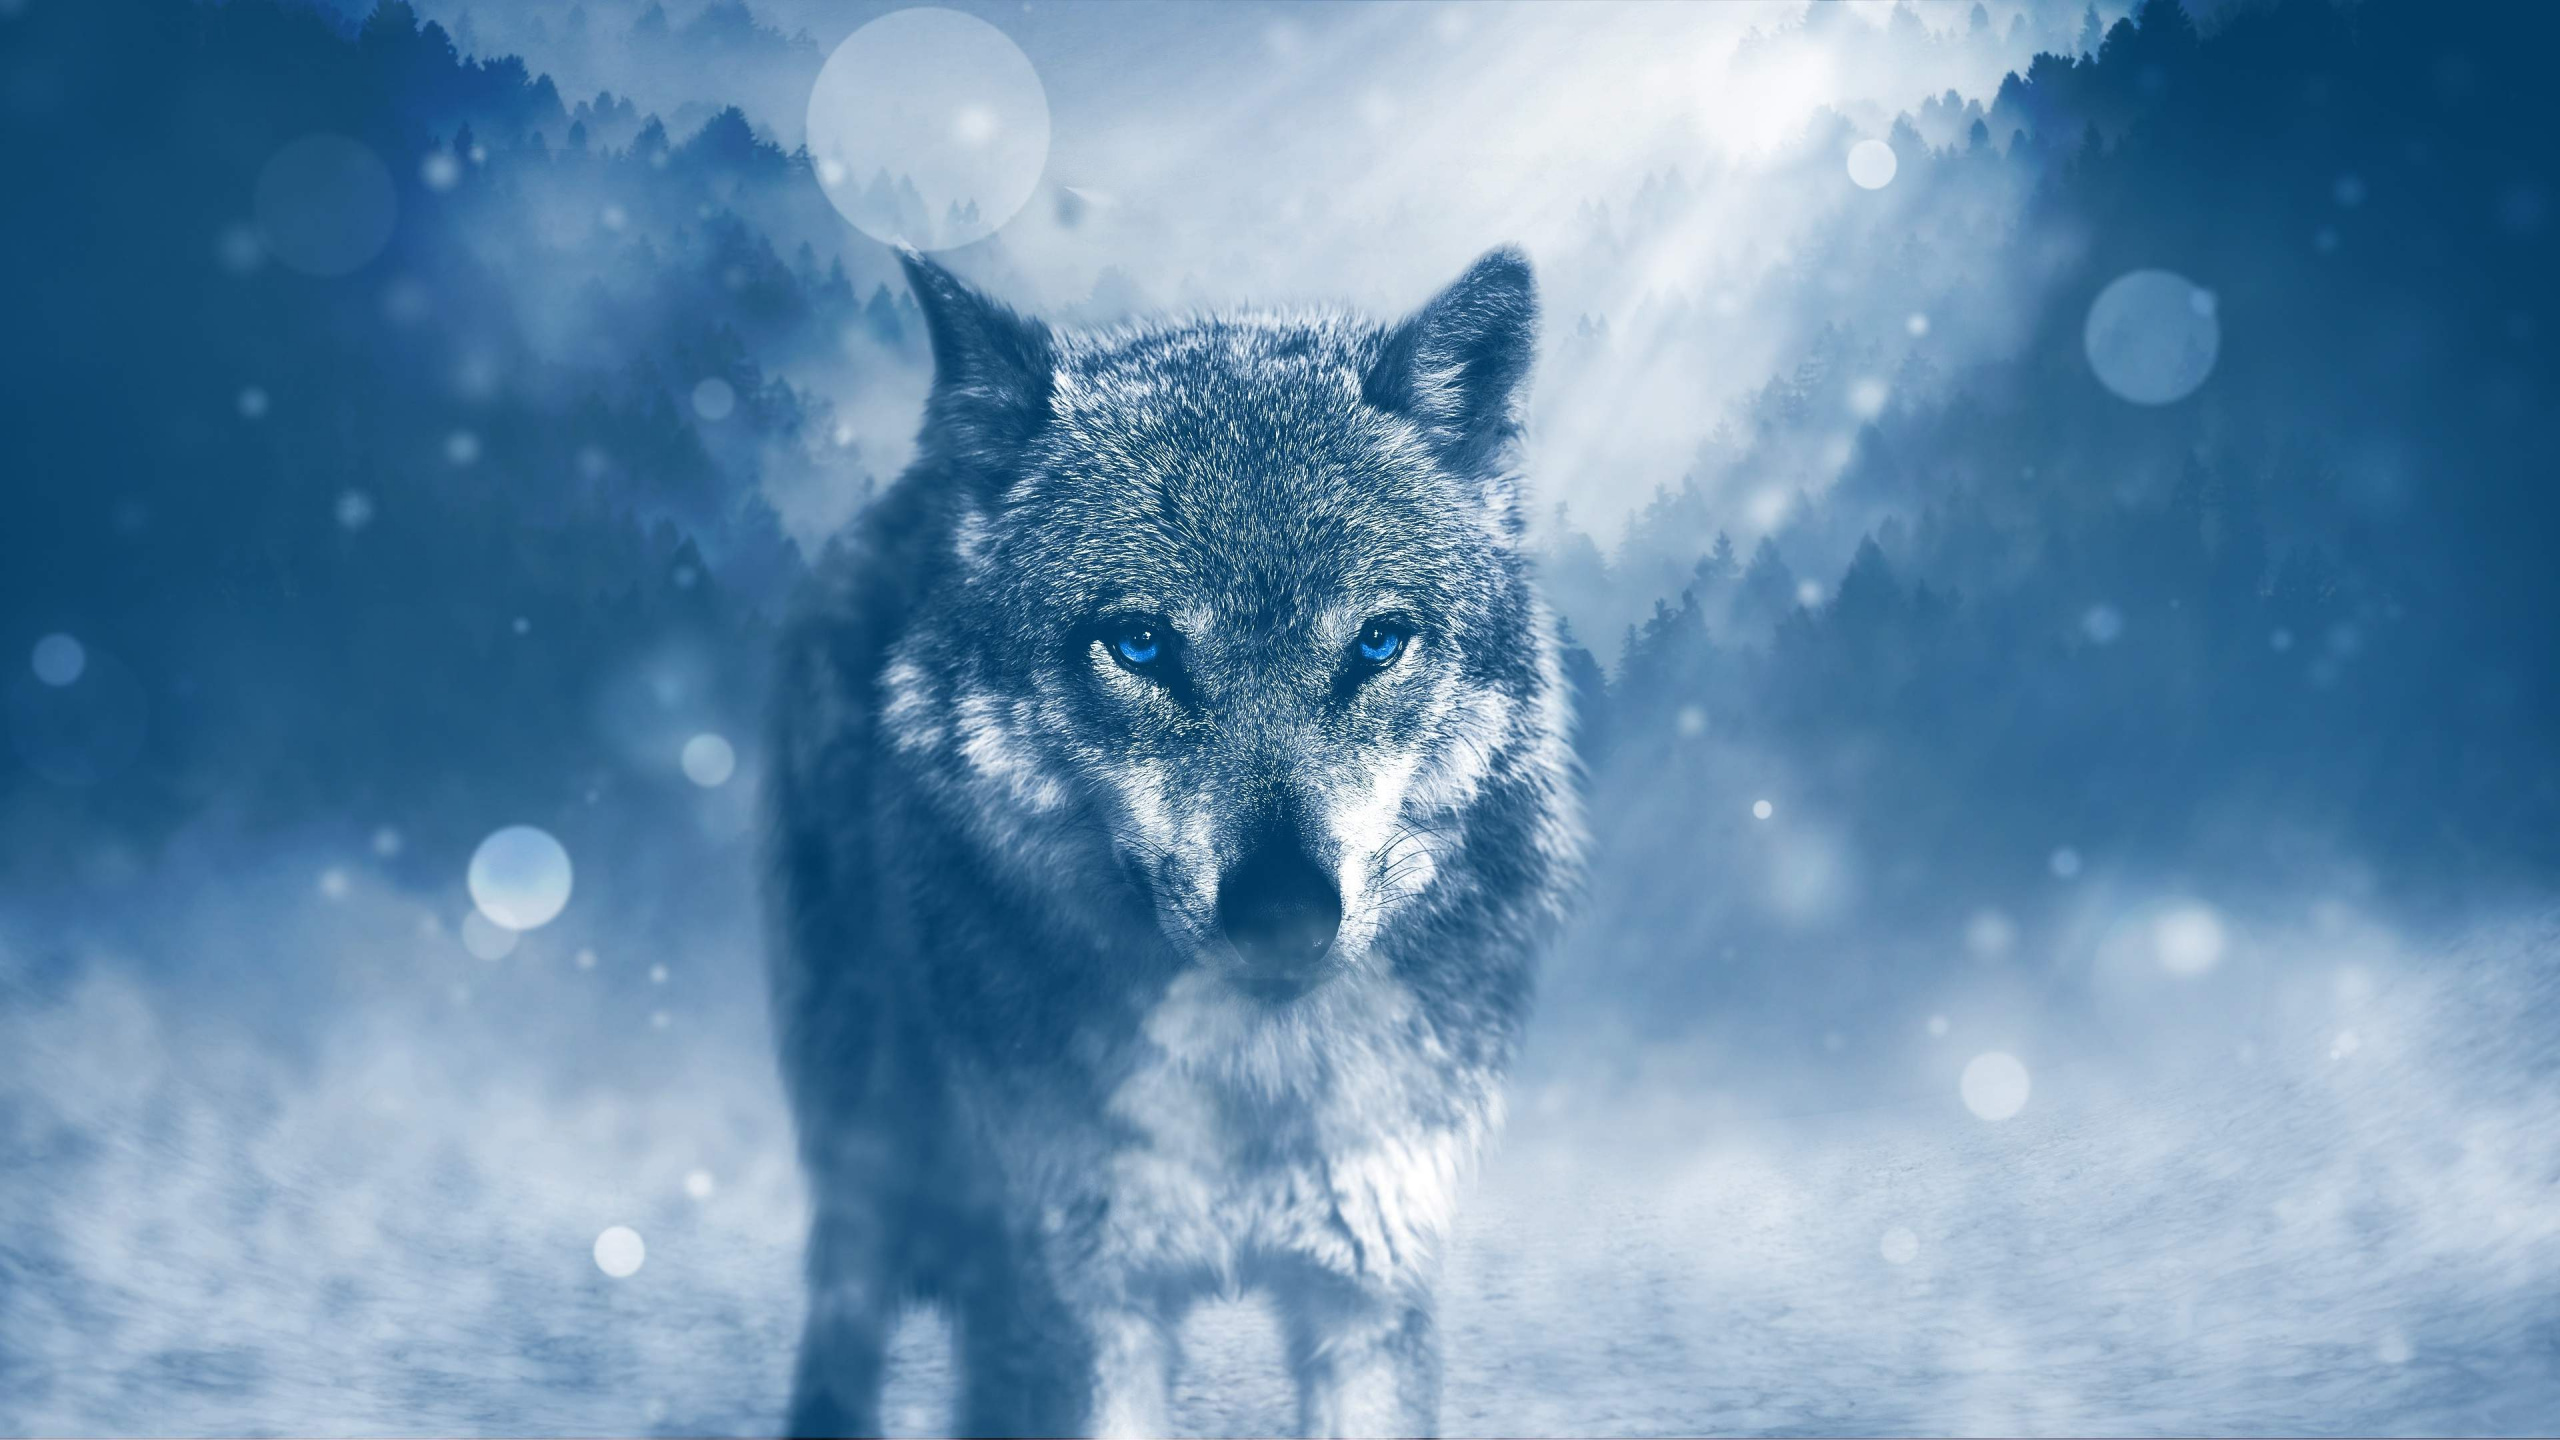 Gray Wolf on Snow Covered Ground. Wallpaper in 2560x1440 Resolution